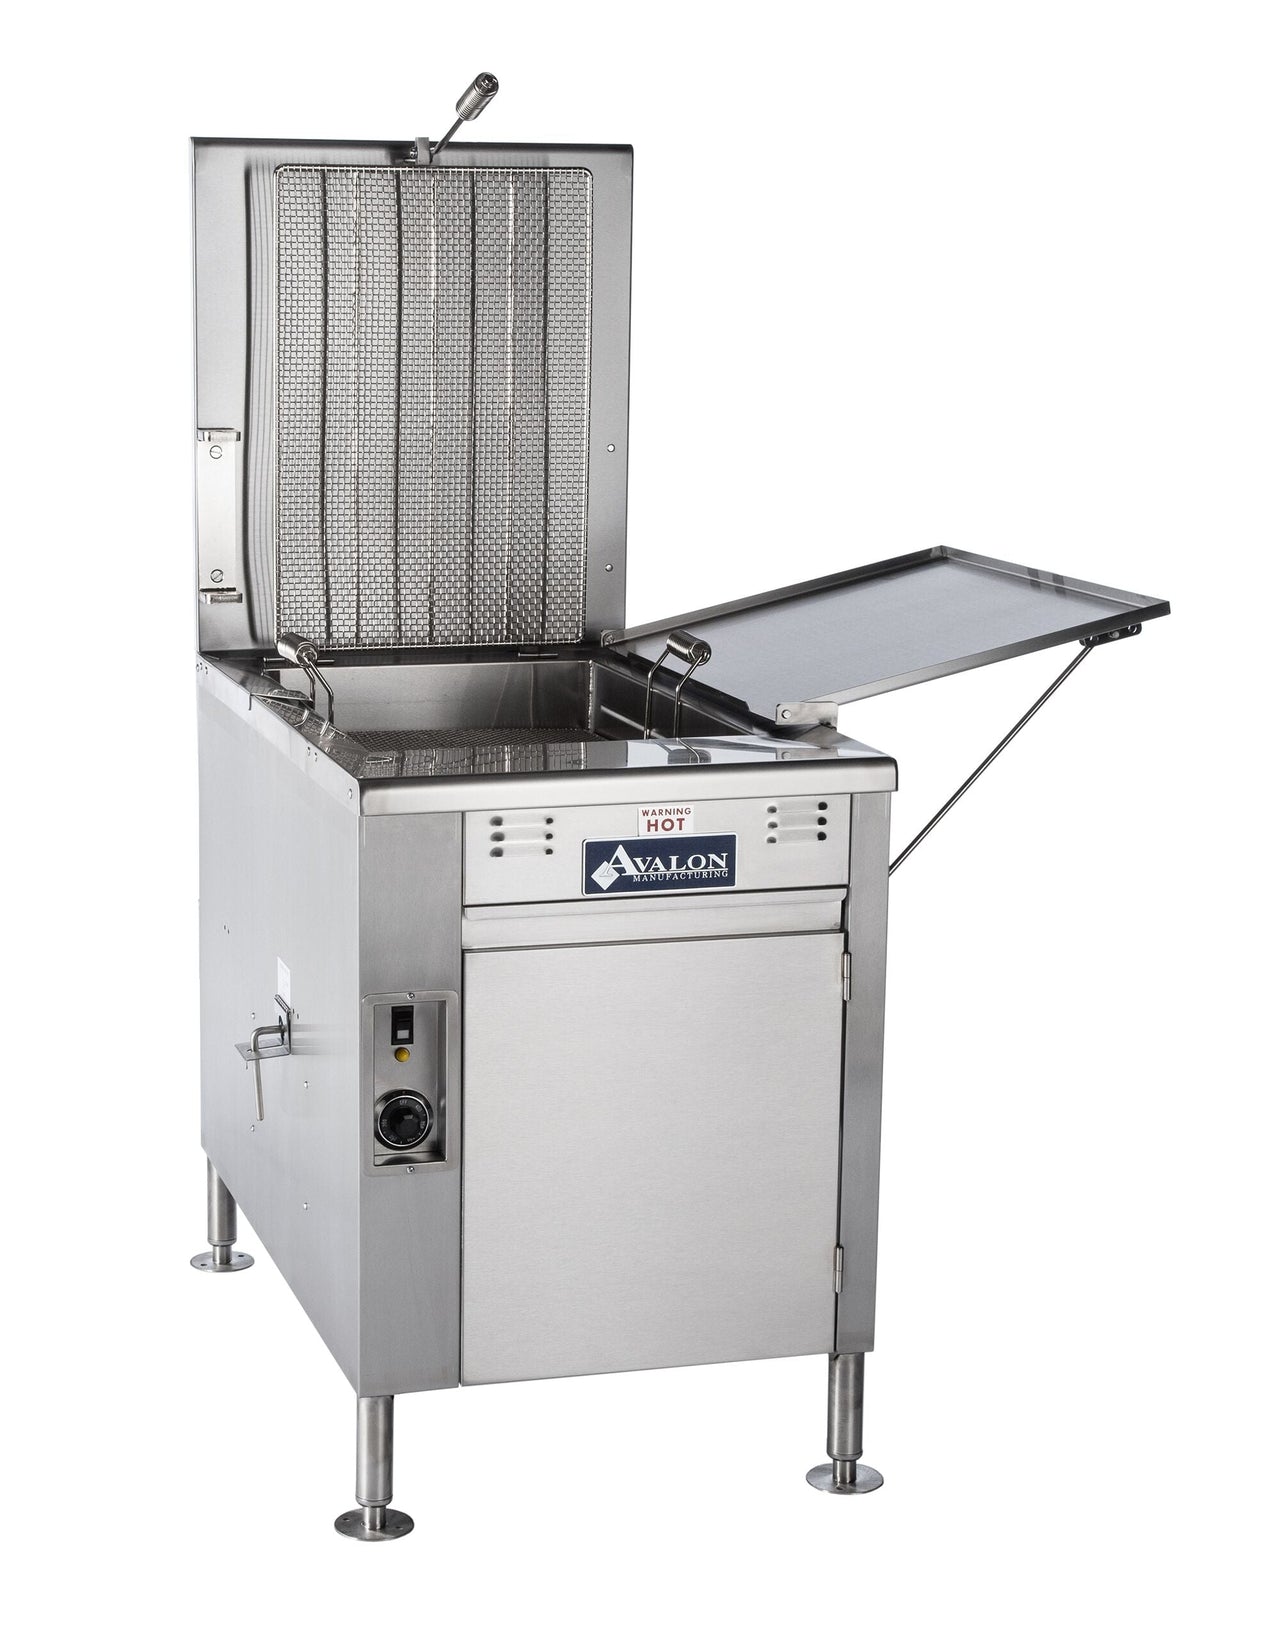 Avalon 20" x 20" Donut Fryer, Natural Gas, Standing Pilot, Right Side Drain Board with Submerger